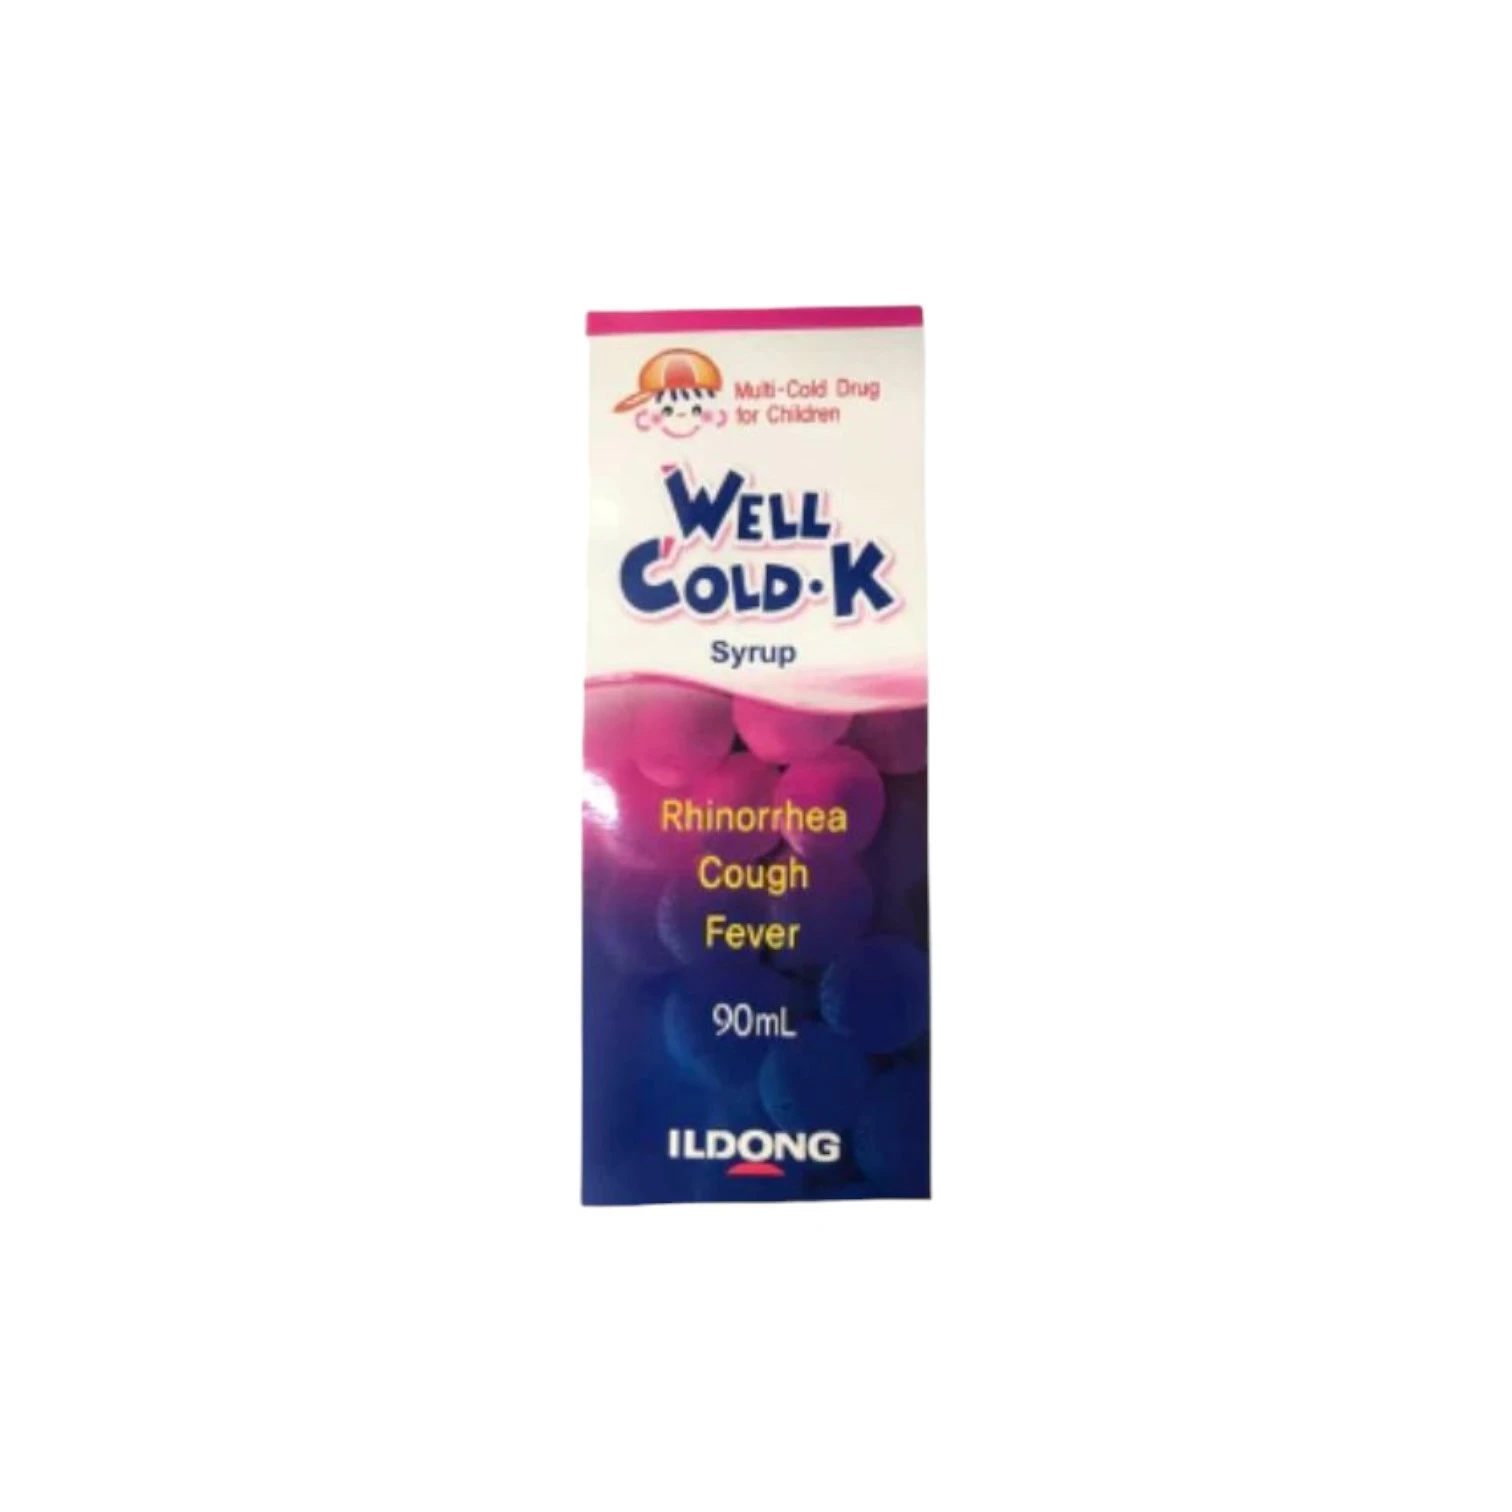 Well Cold-K Syrup 90ml